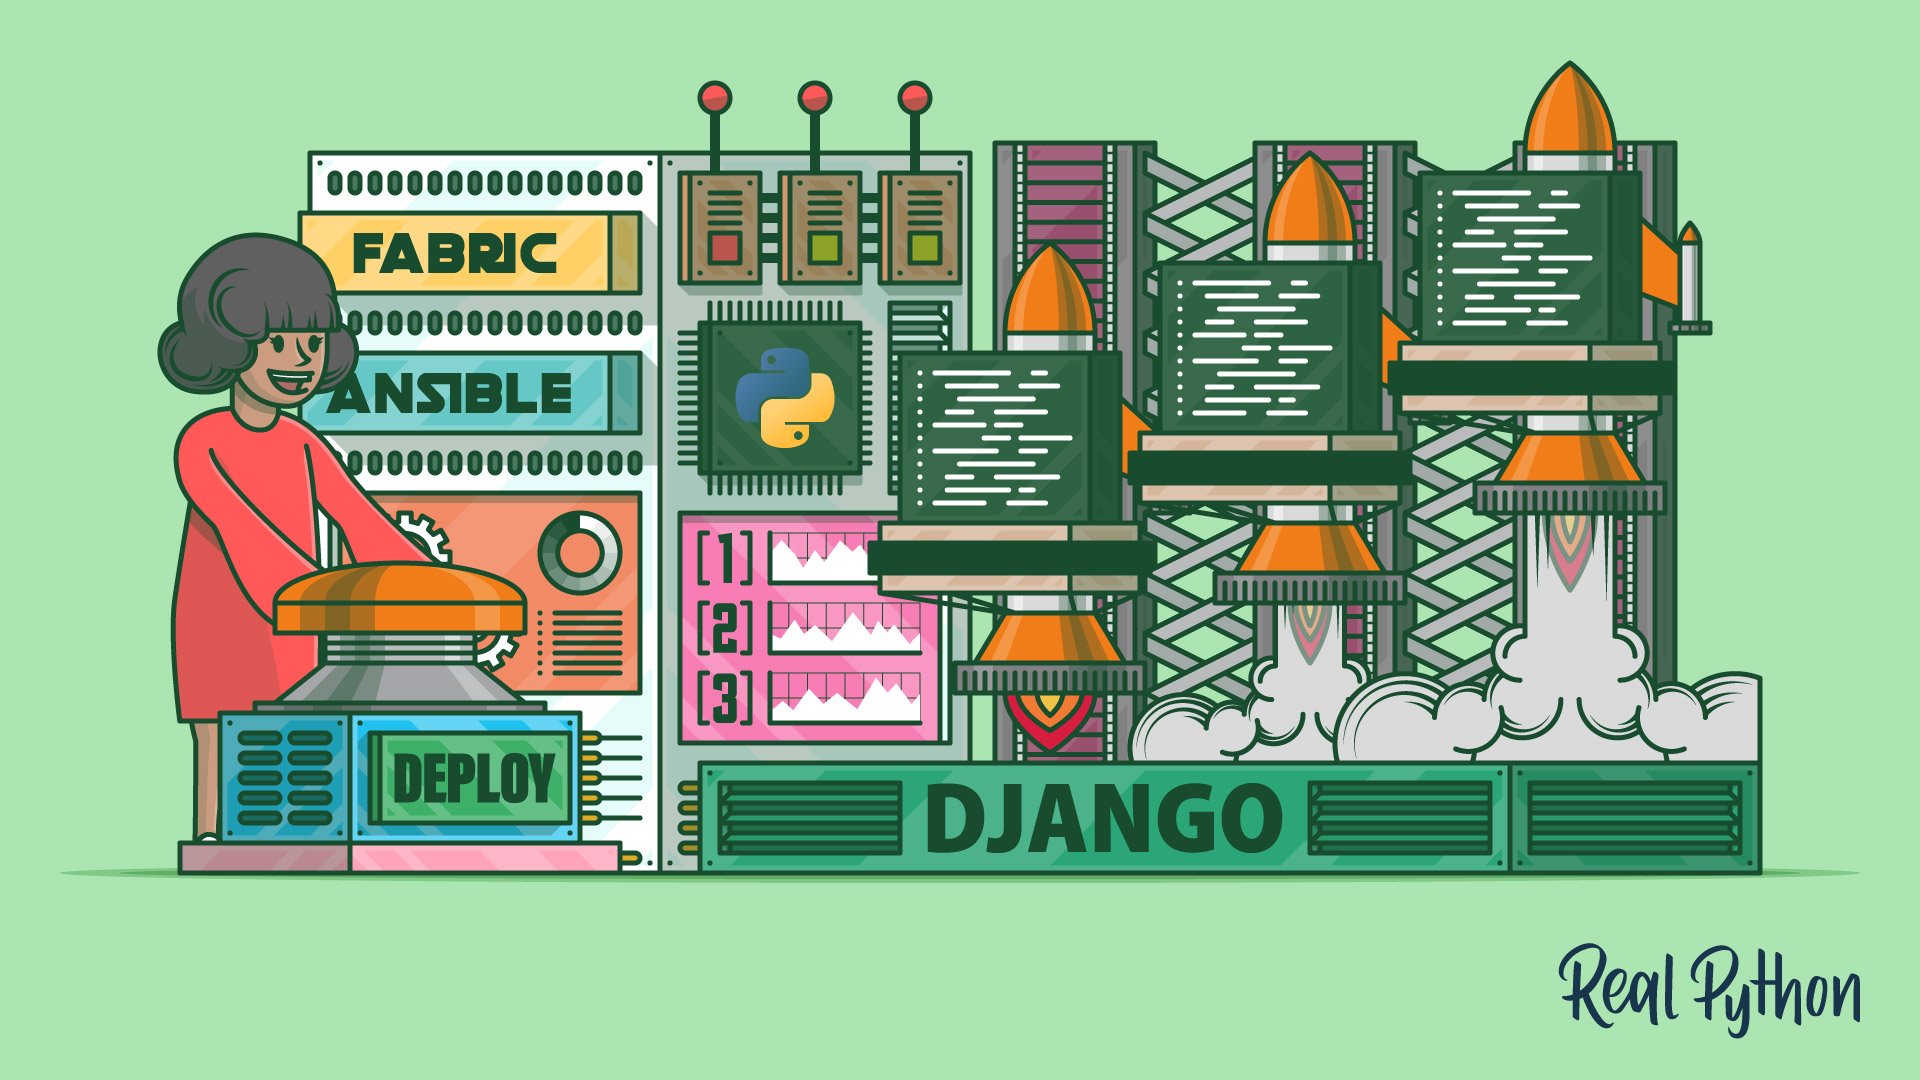 Automating Django Deployments with Fabric and Ansible